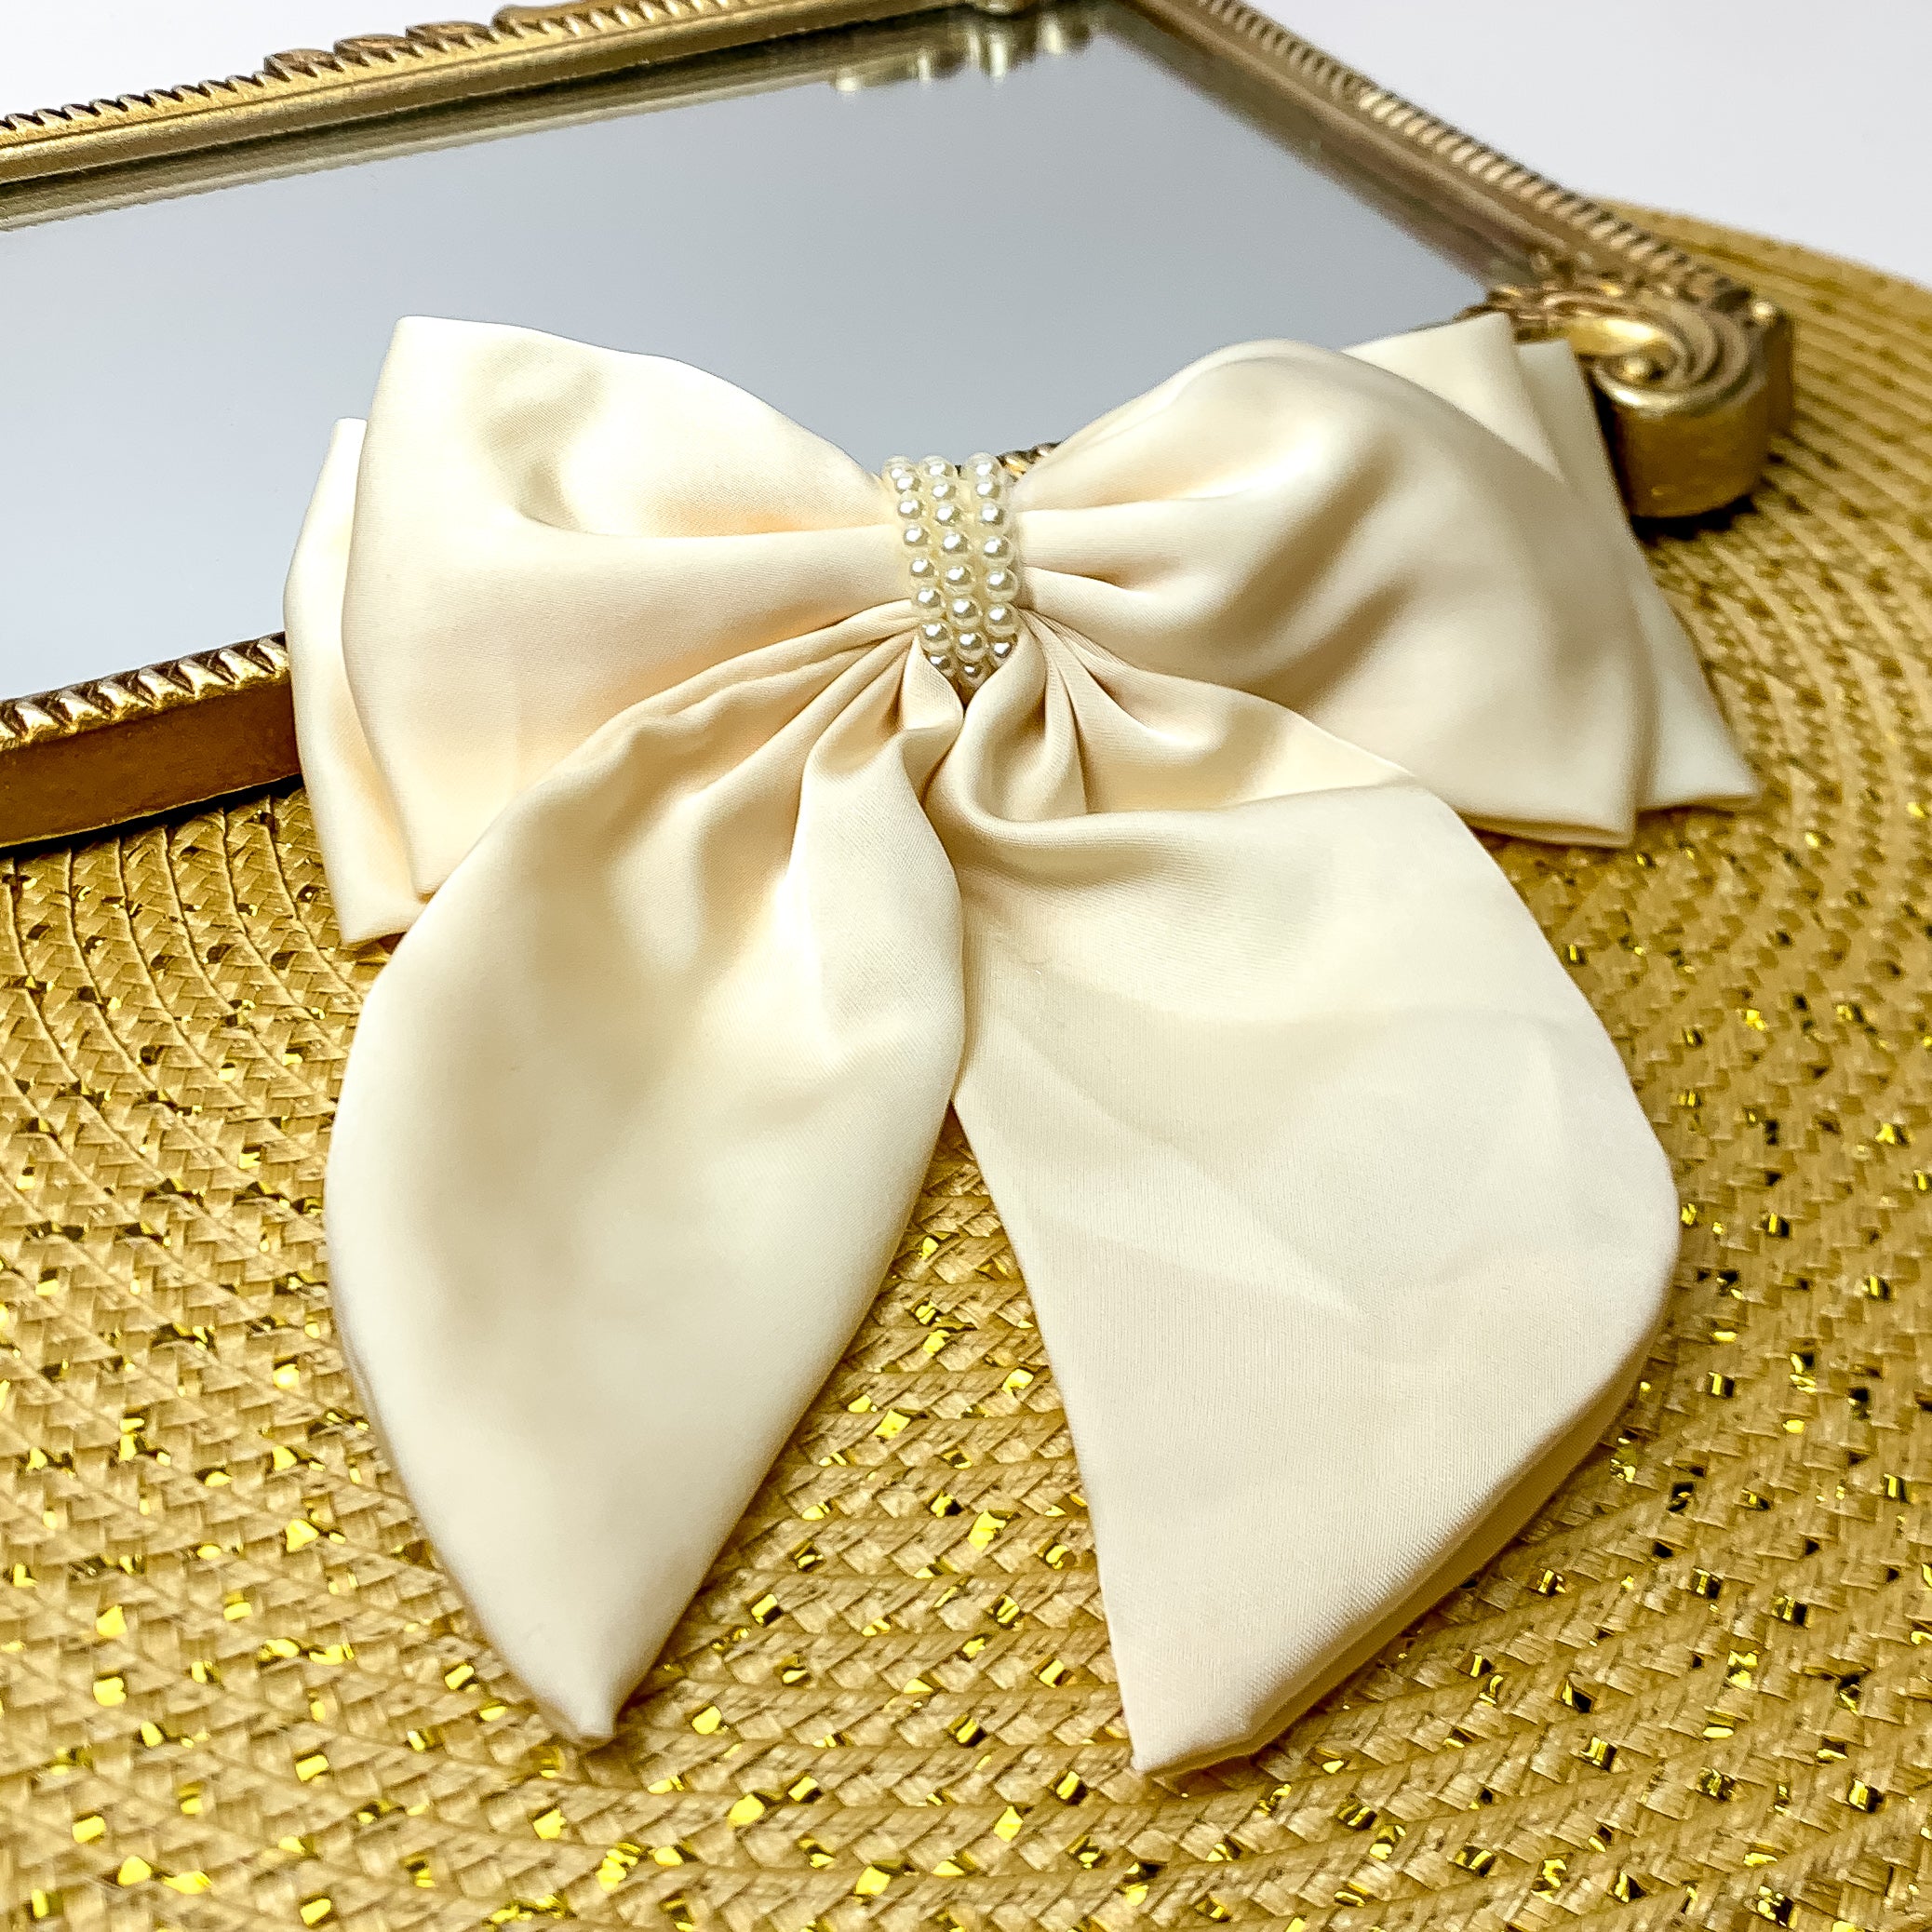 This layered ivory bow with a pearl canter is laid against a gold mirror and has a gold background.